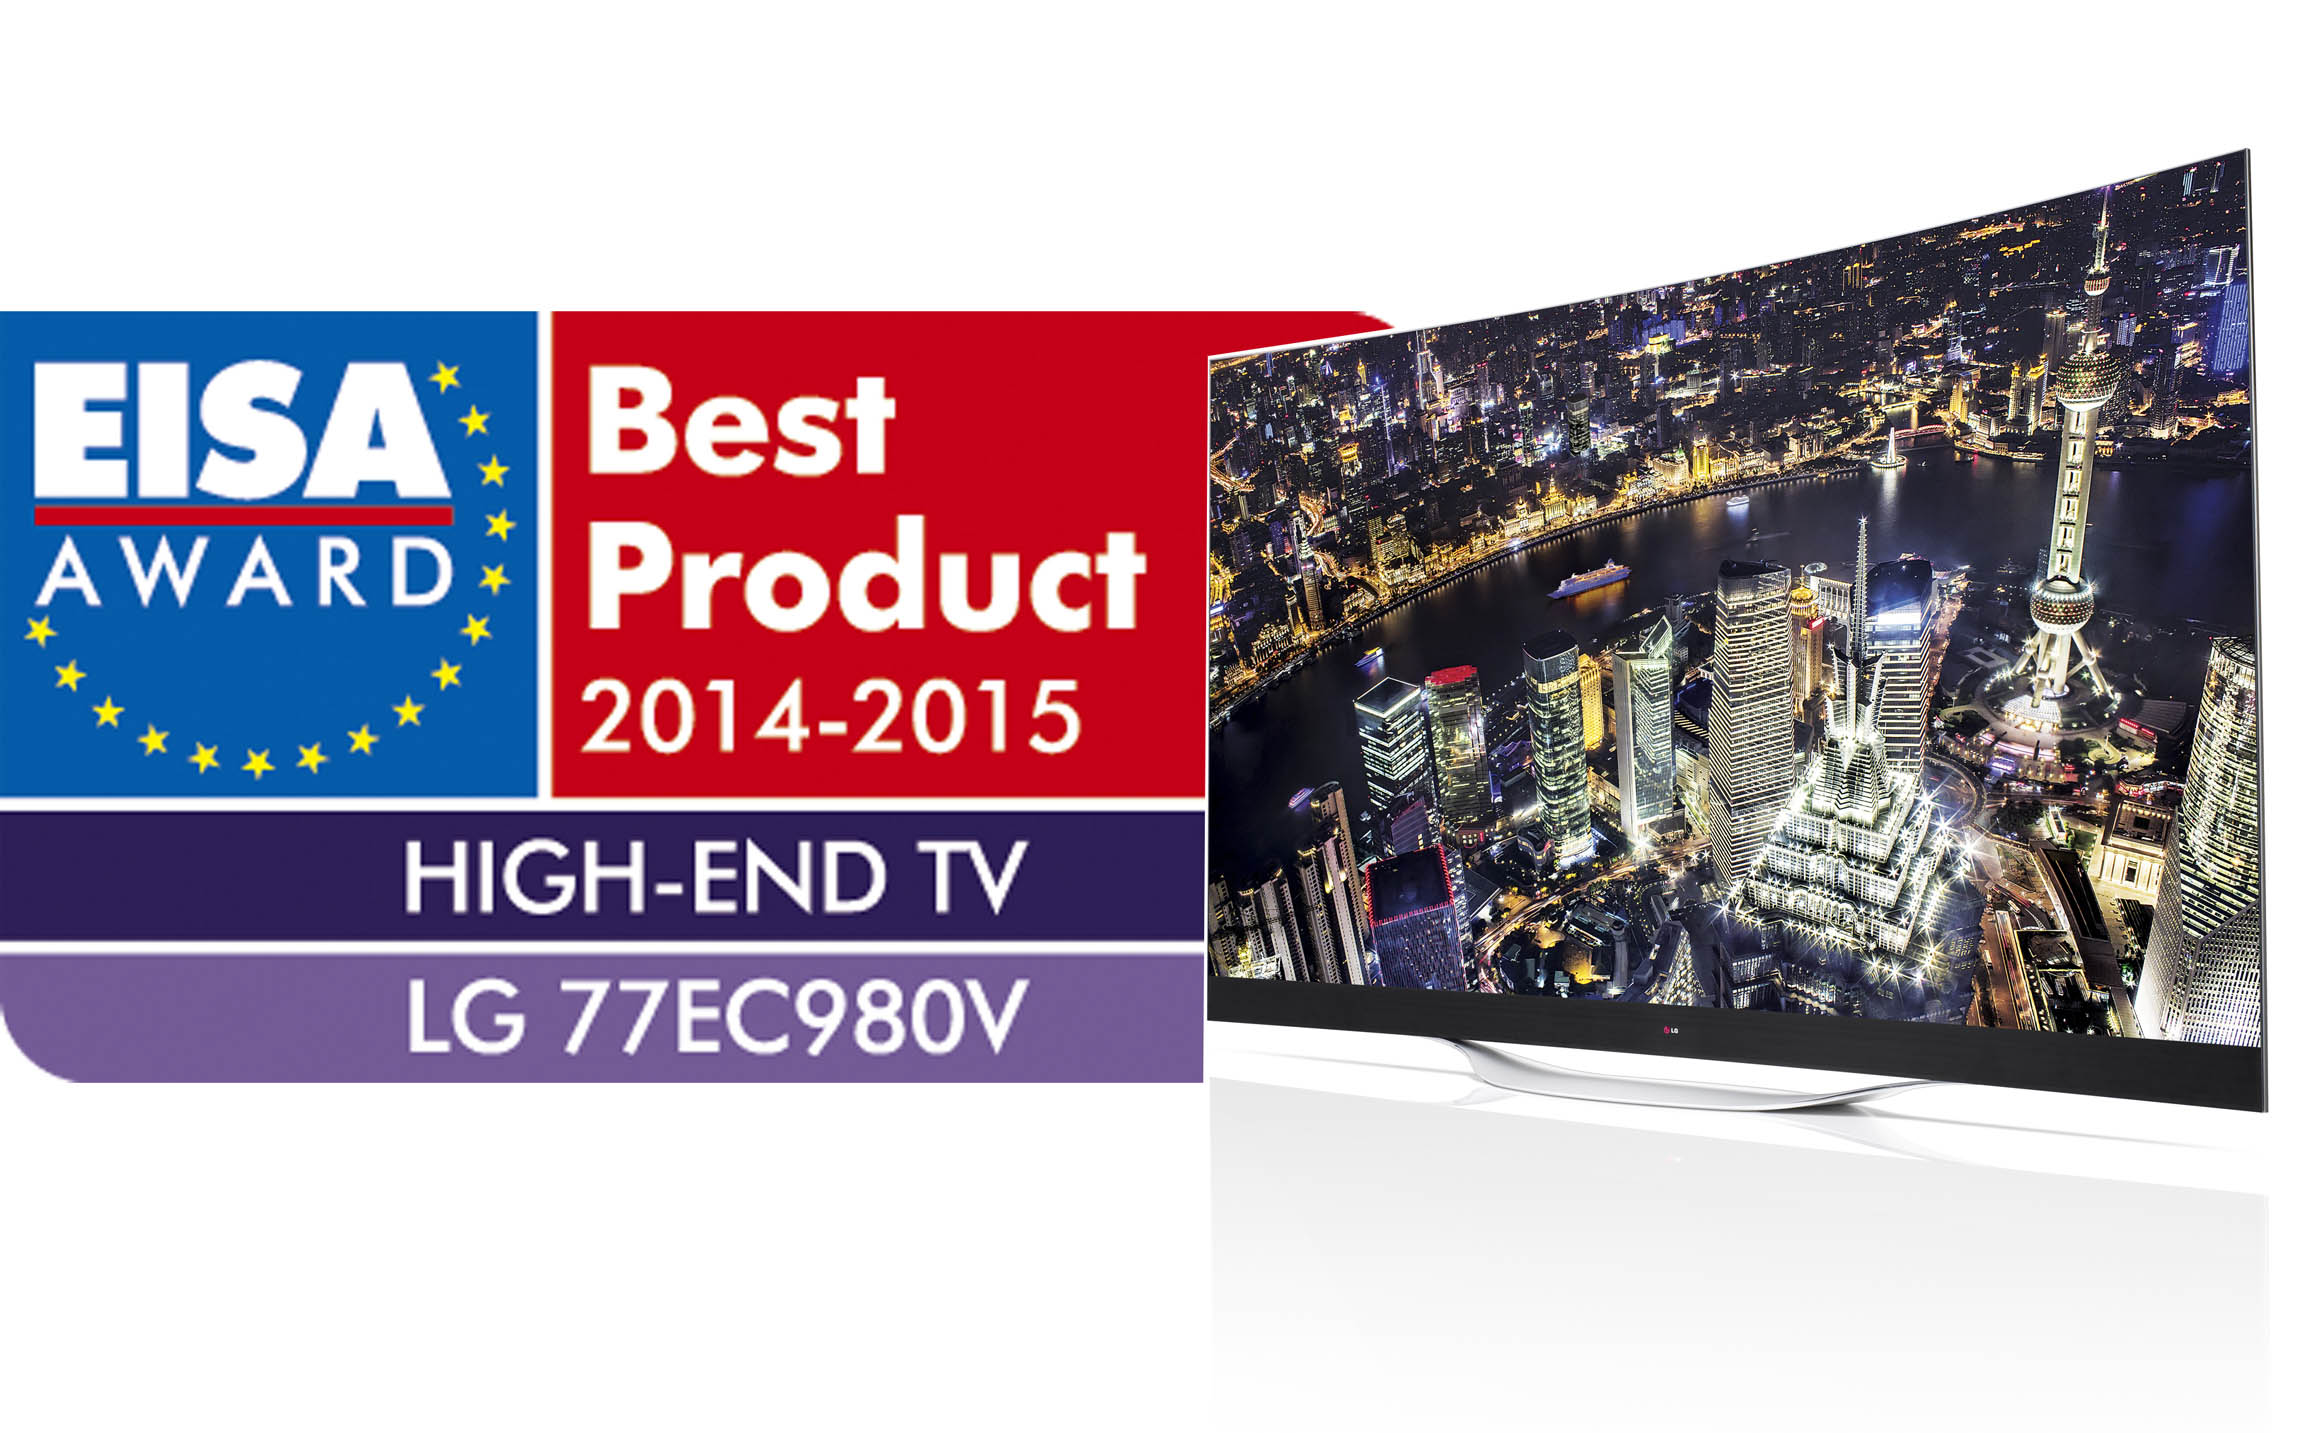 LG Electronics announced that its 4K OLED TV, Smart+ TV, SoundPlate and its flagship LG G3 smartphone have been recognized by the European Imaging and Sound Association (EISA) 2014-2015 Awards. (image credit: LG Electronics)